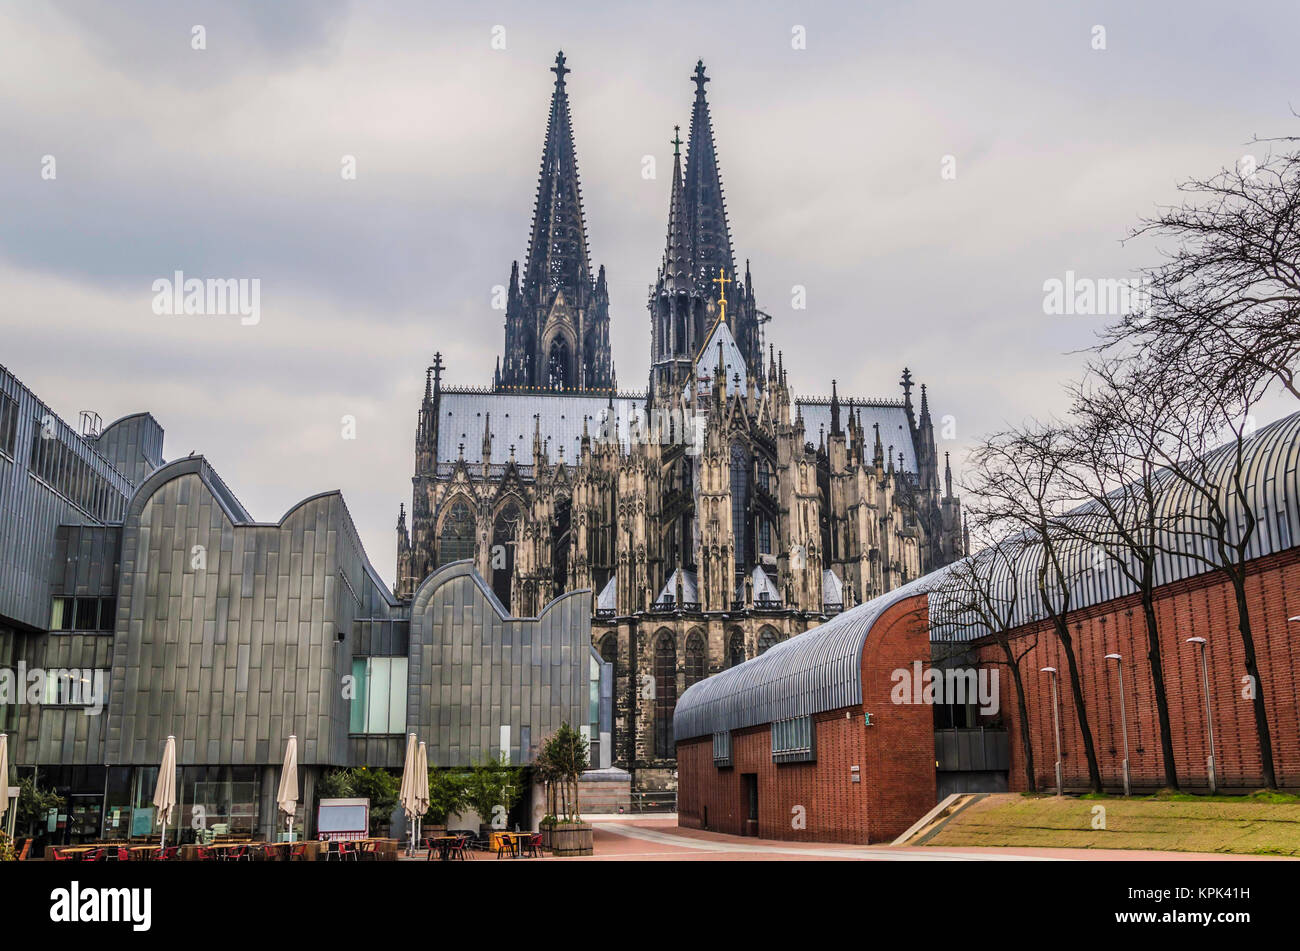 Shock of styles the Gothic of the German cathedral of Cologne dating to one thousand two hundred and forty-eight surrounded by modernist constructions Stock Photo